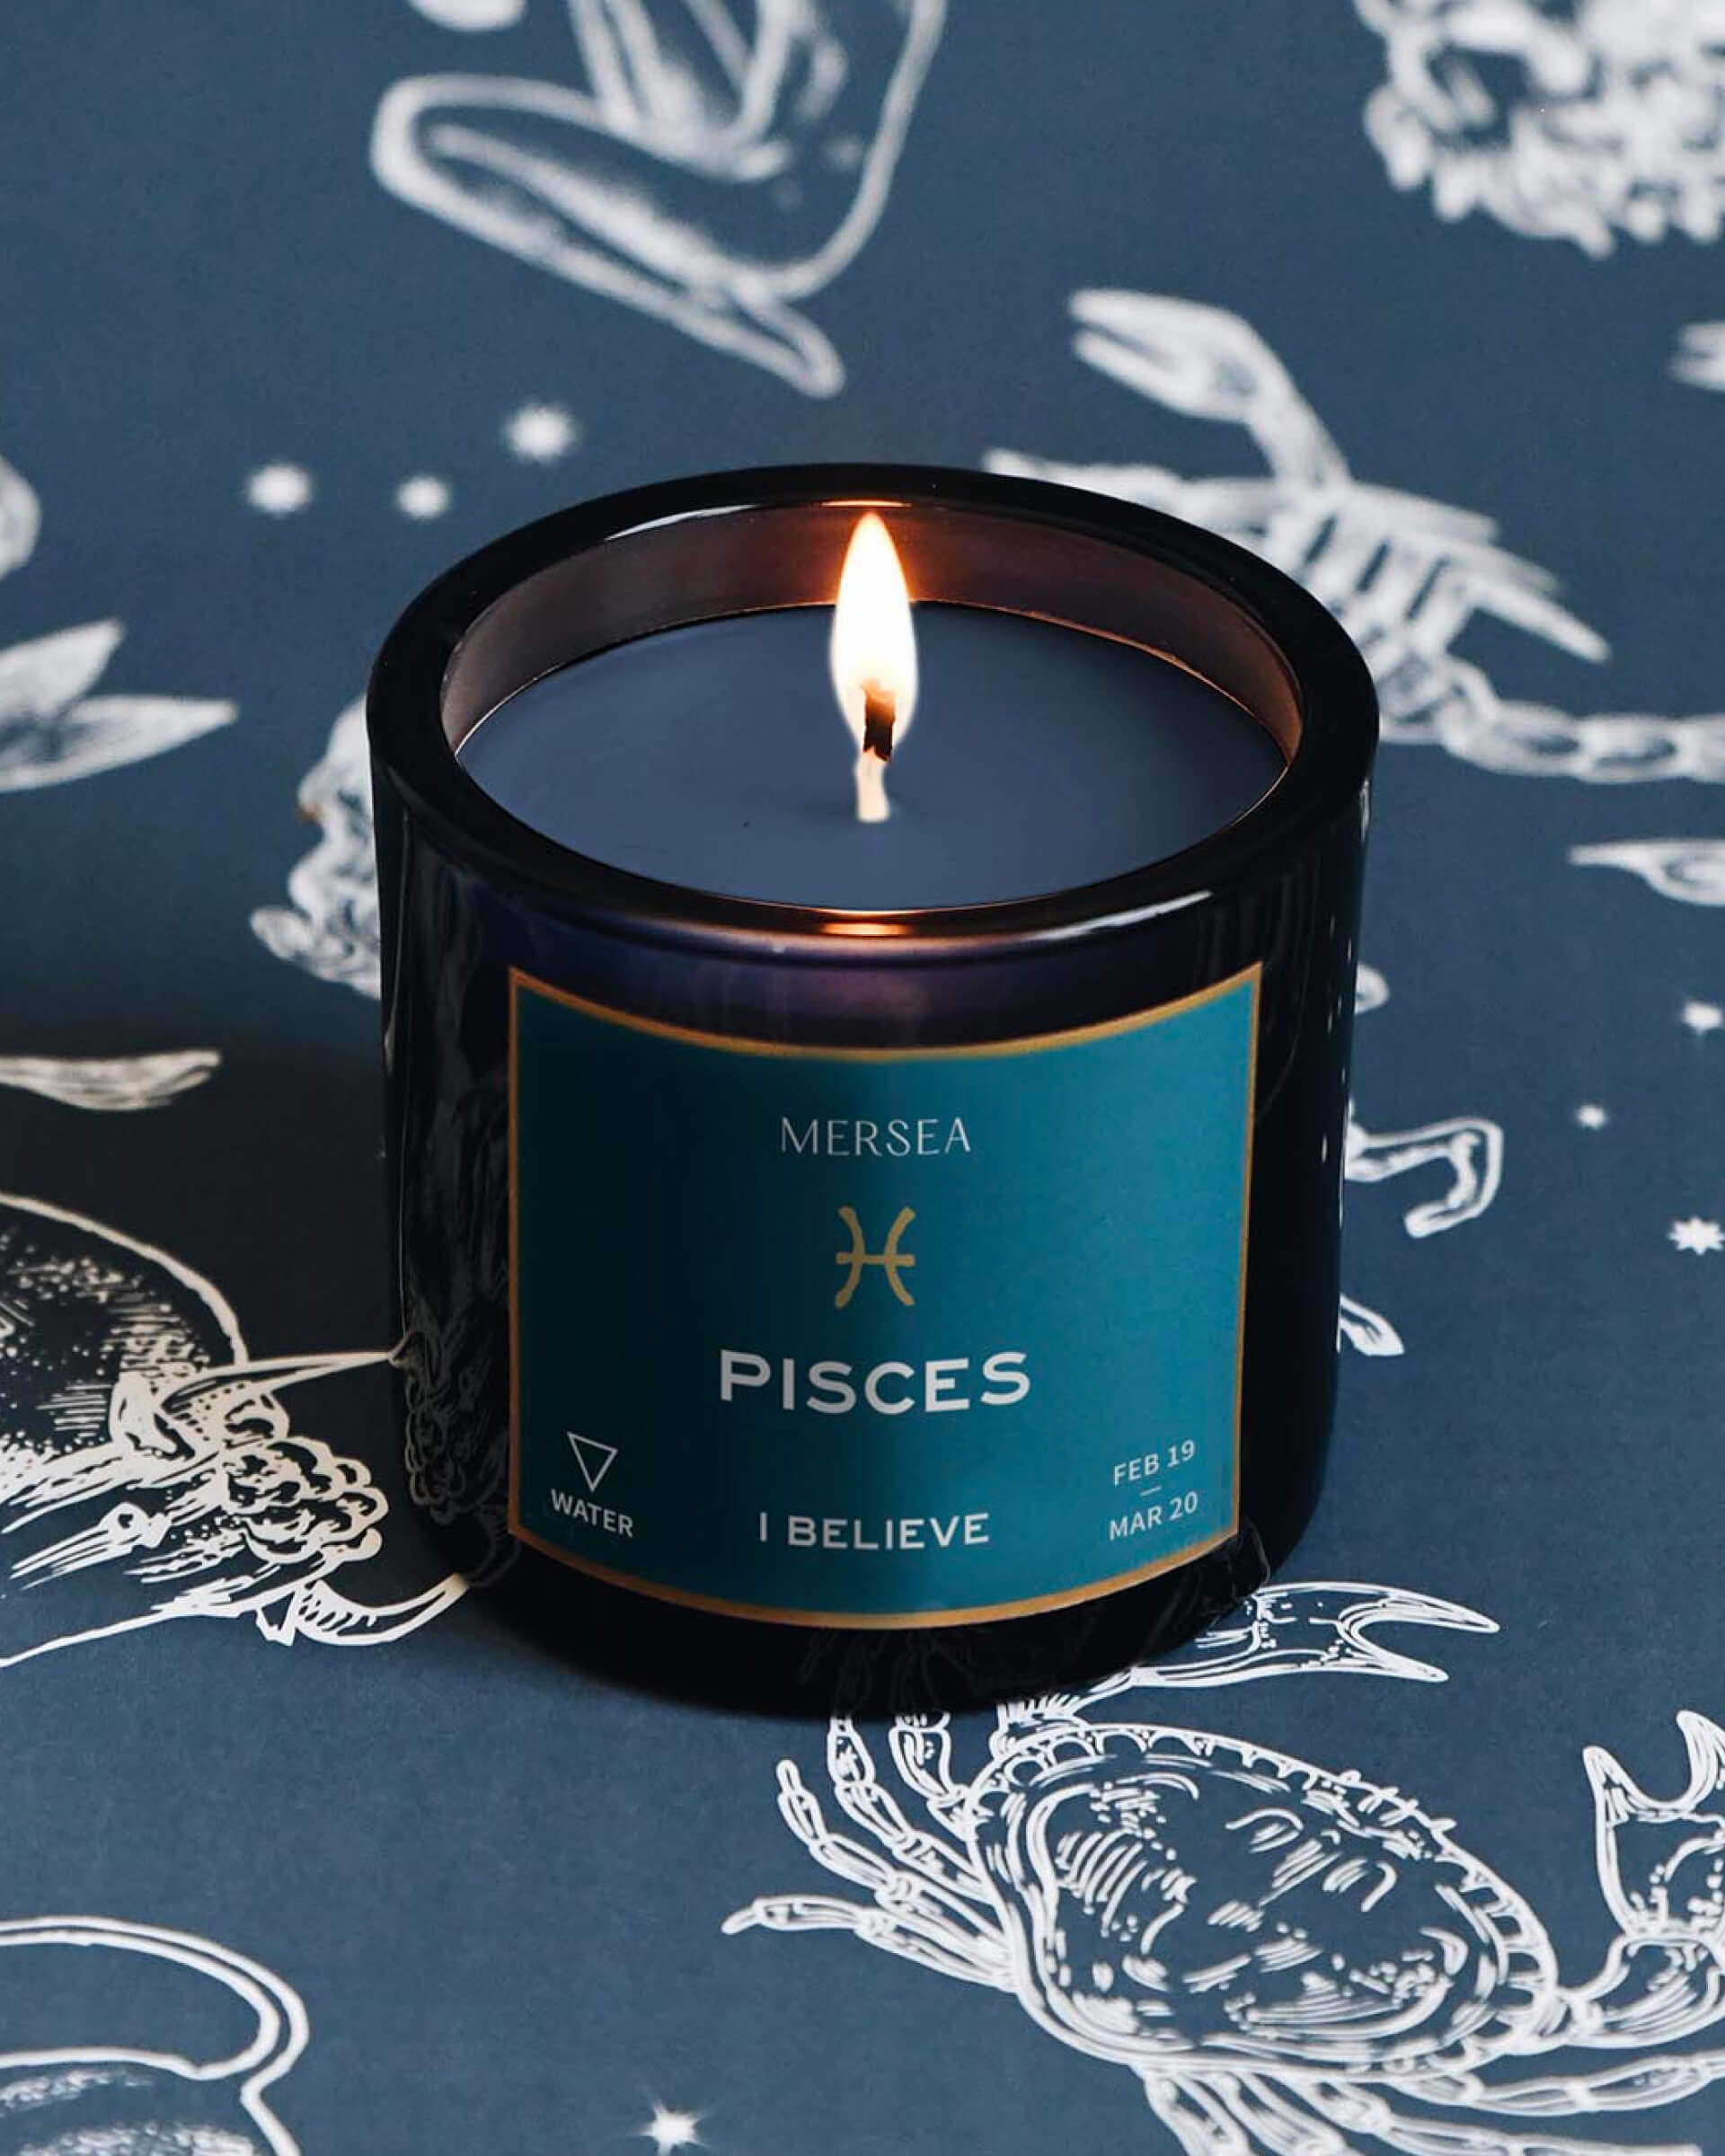 Mersea Pisces candle against astrology sign background